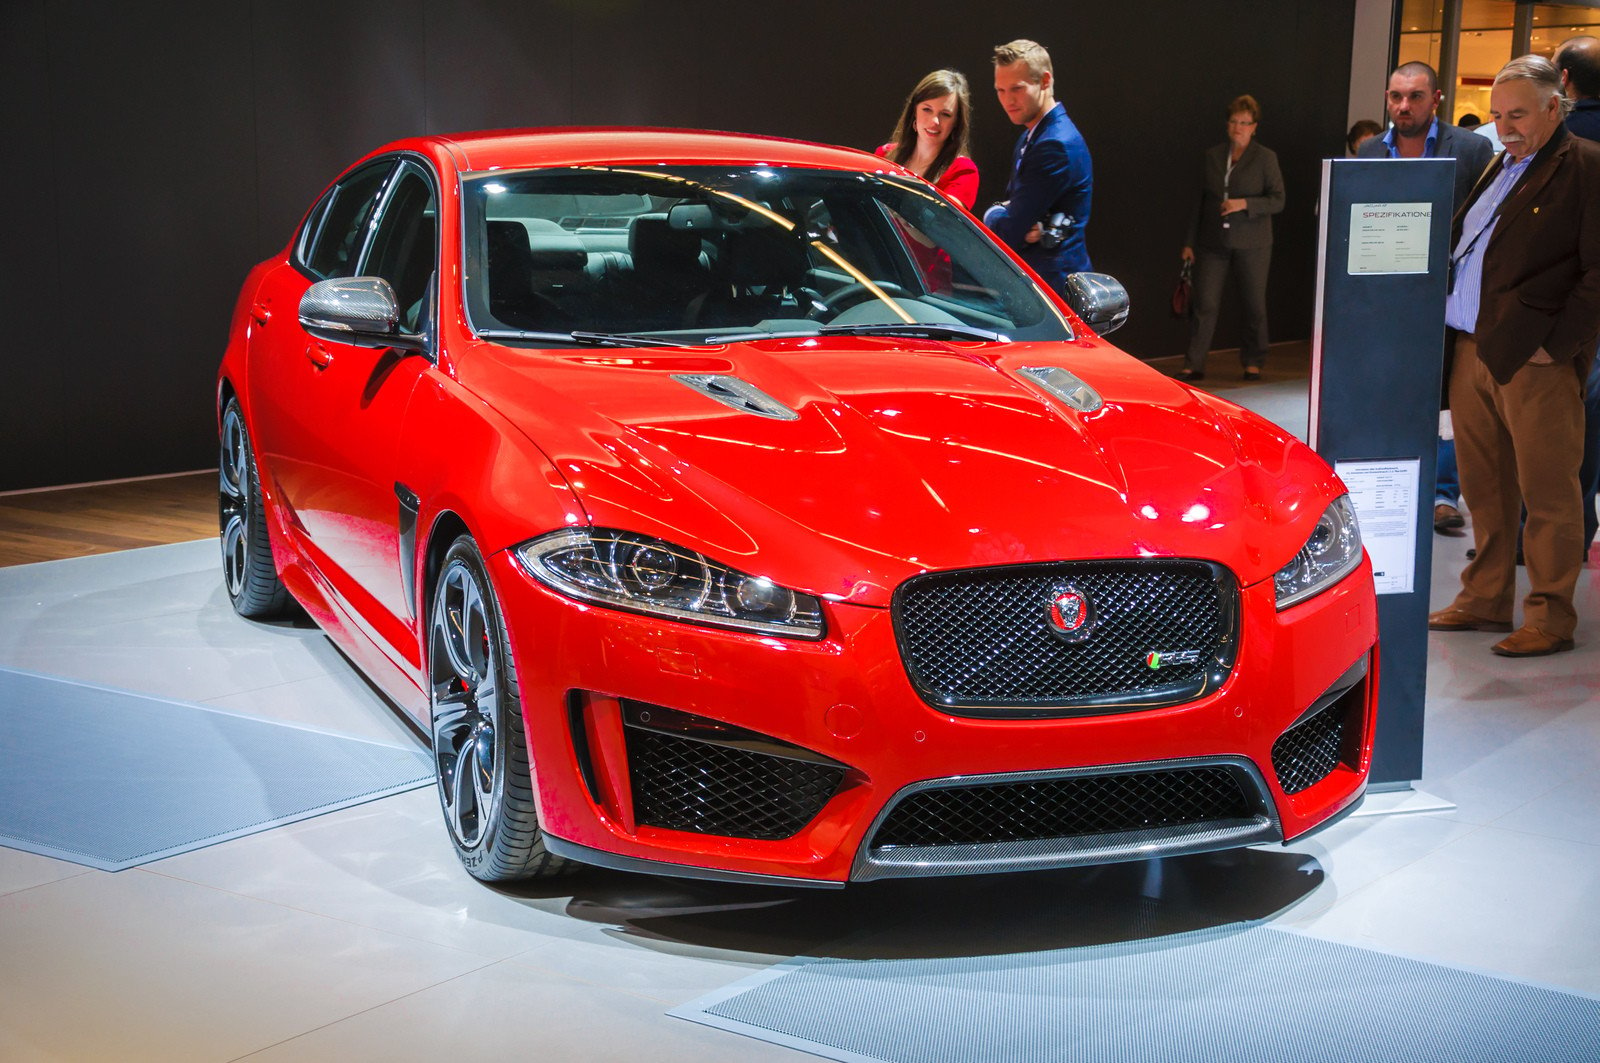 <p>Some Jaguar models have faced reliability issues, causing them to be prone to breaking down before reaching 100k miles. According to this <a href="https://finance.yahoo.com/news/avoid-buying-10-cars-likely-150112812.html" rel="noopener">Yahoo Finance article</a>, Jaguar’s high maintenance costs and potential for engine or electrical issues contribute to their unreliability. Despite their prestige, Jaguar owners should be cautious and prepared for possible repairs.</p>